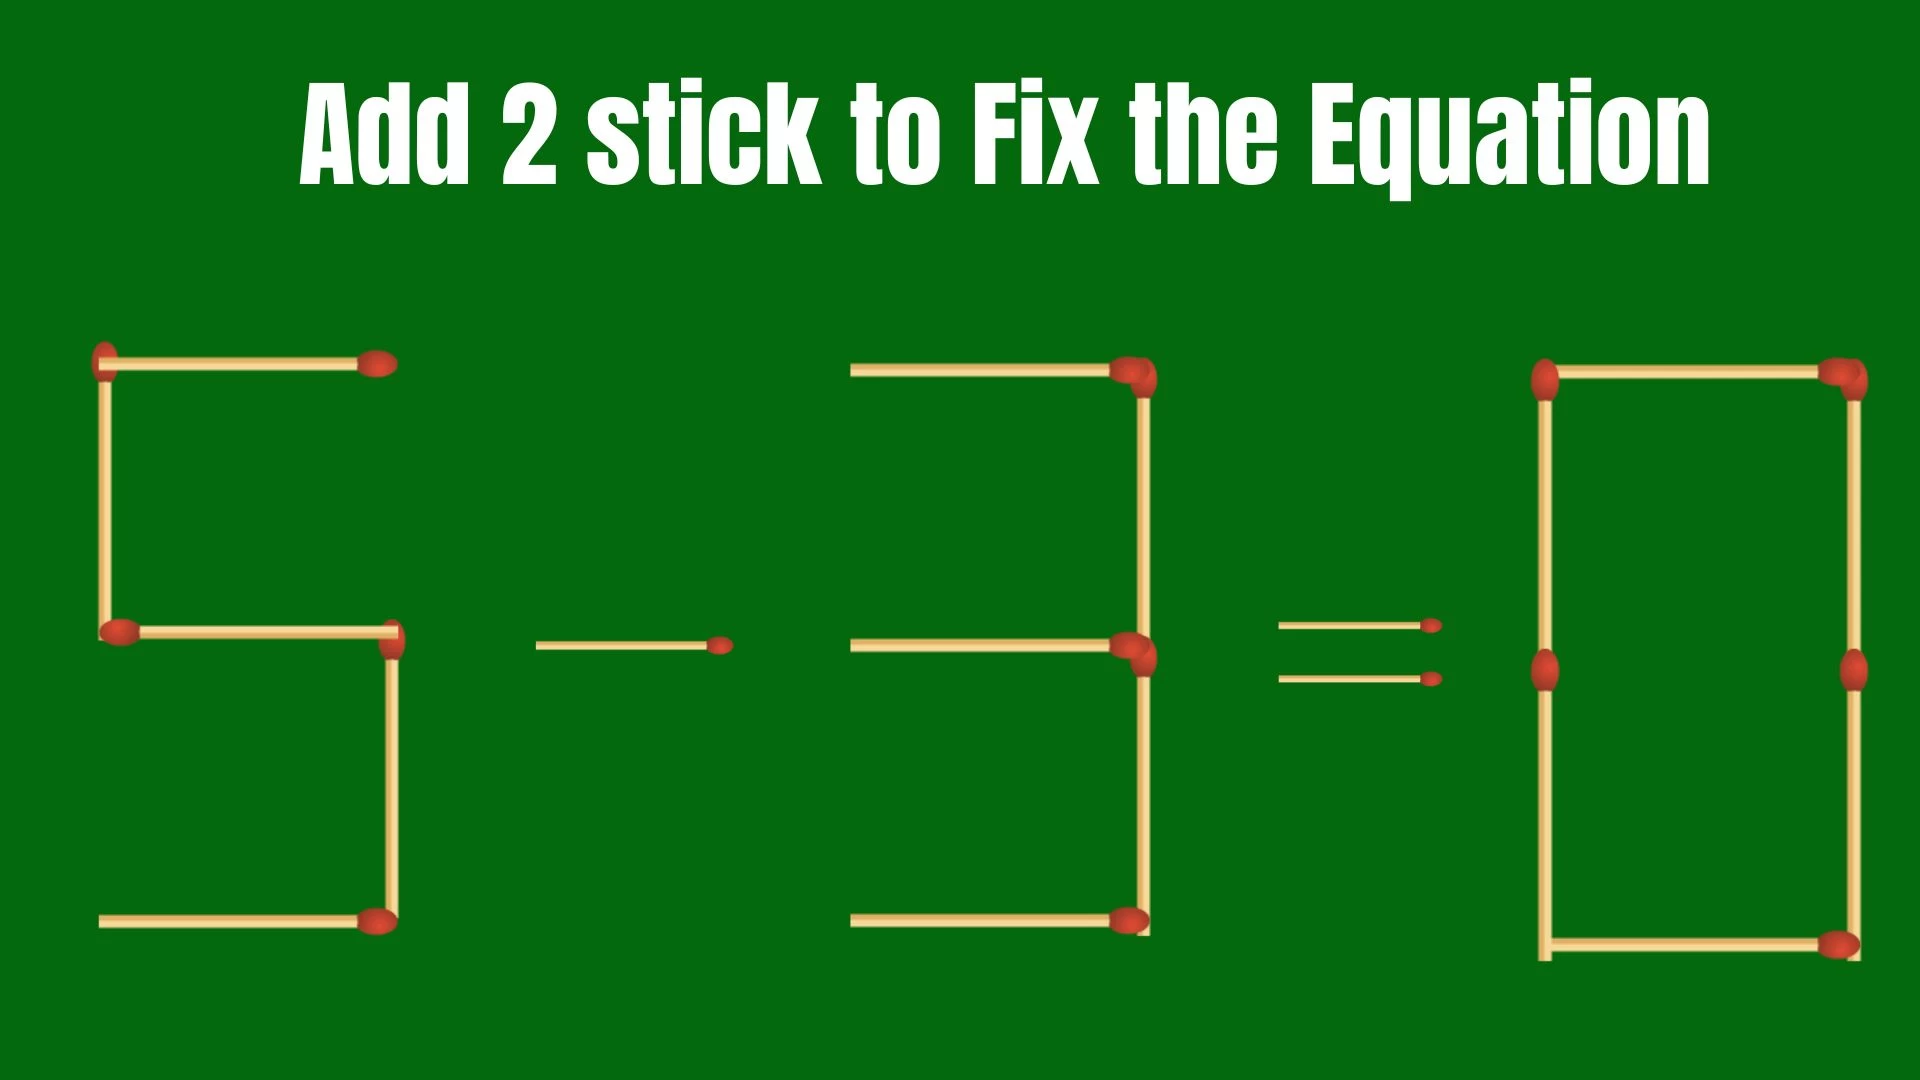 Solve the Puzzle to Transform 5-3=0 by Adding 2 Matchsticks to Correct the Equation